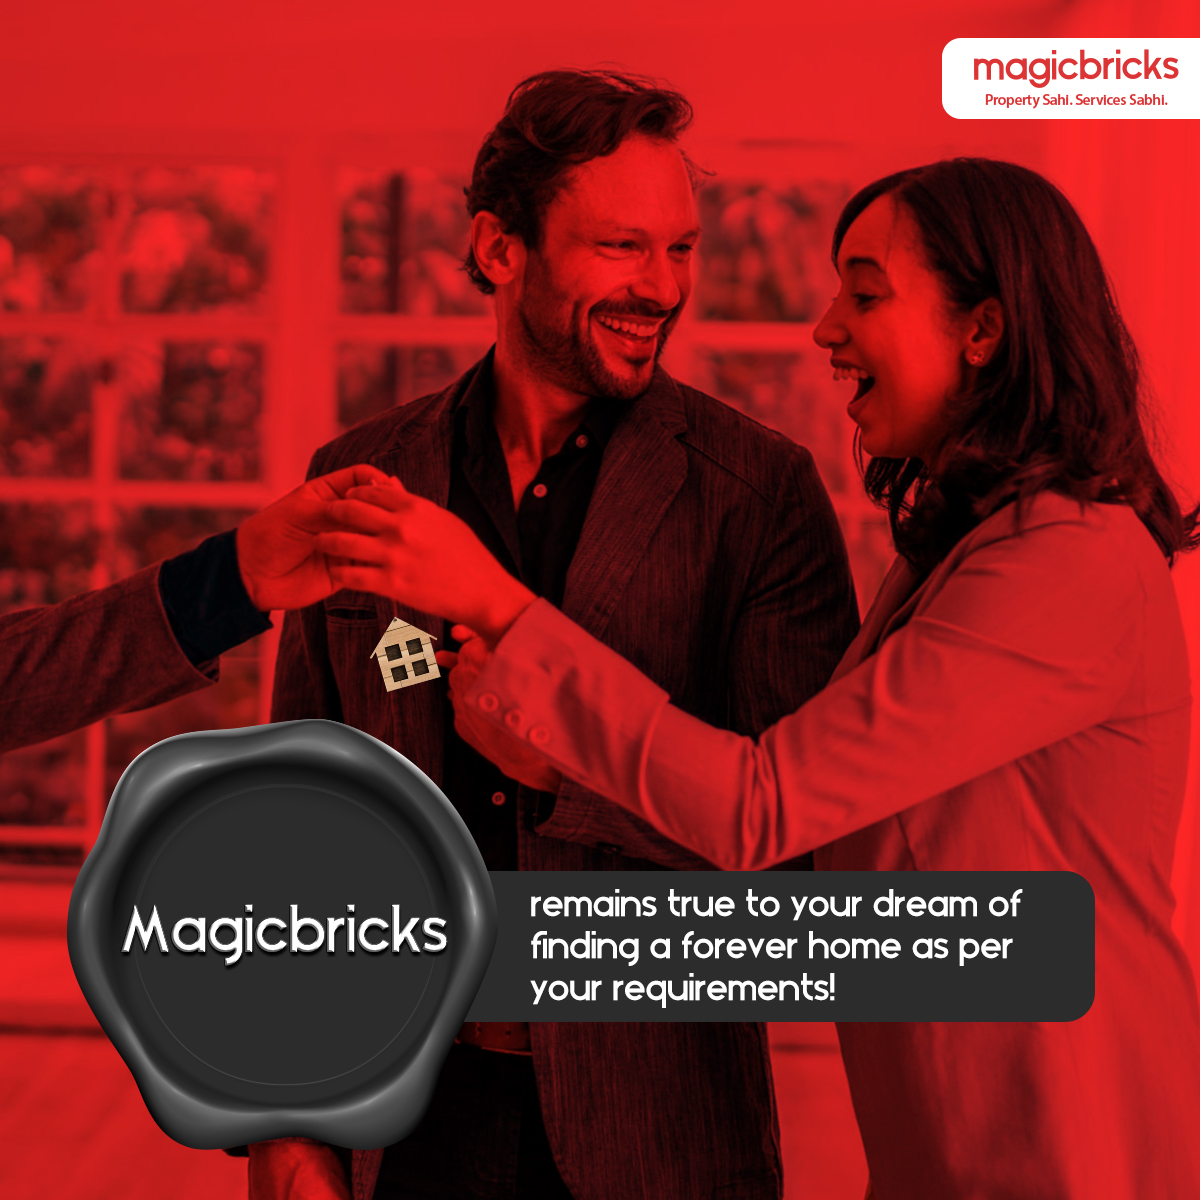 There might not be a ‘Magic Brick’ yet, but #Magicbricks continues to make finding and owning a home ‘fool’-proof for you. #Magicbricks #PropertySahiServicesSabhi #PropertyServices #DreamHome #indianrealestate #AprilFoolsDay